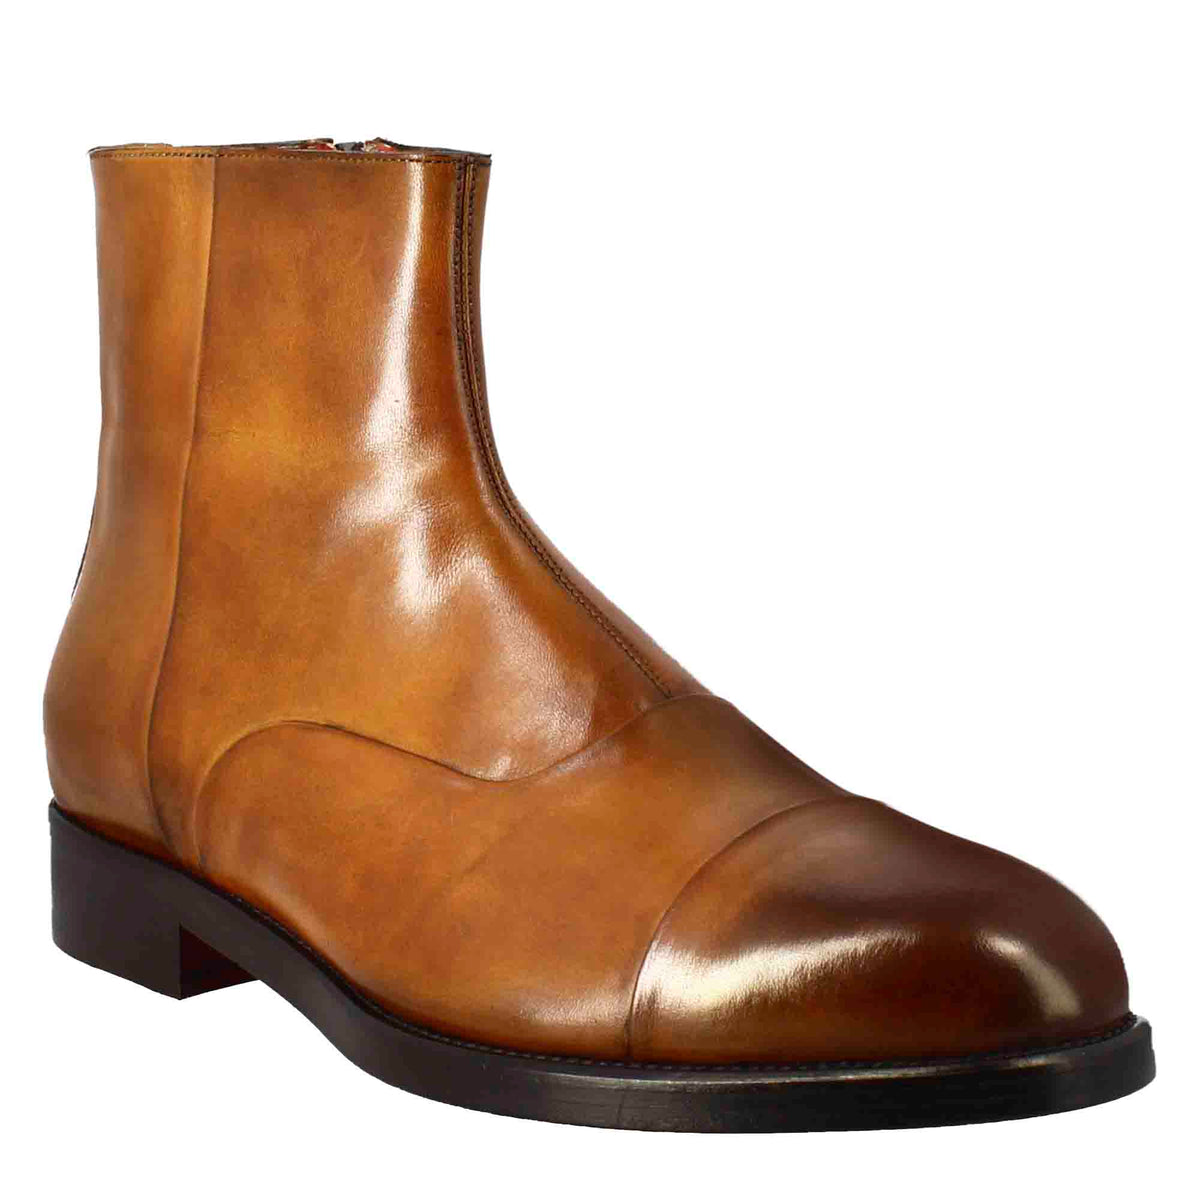 Handmade Brown Leather Chelsea Ankle Boots with Zip Closure, Men Ankle Boots